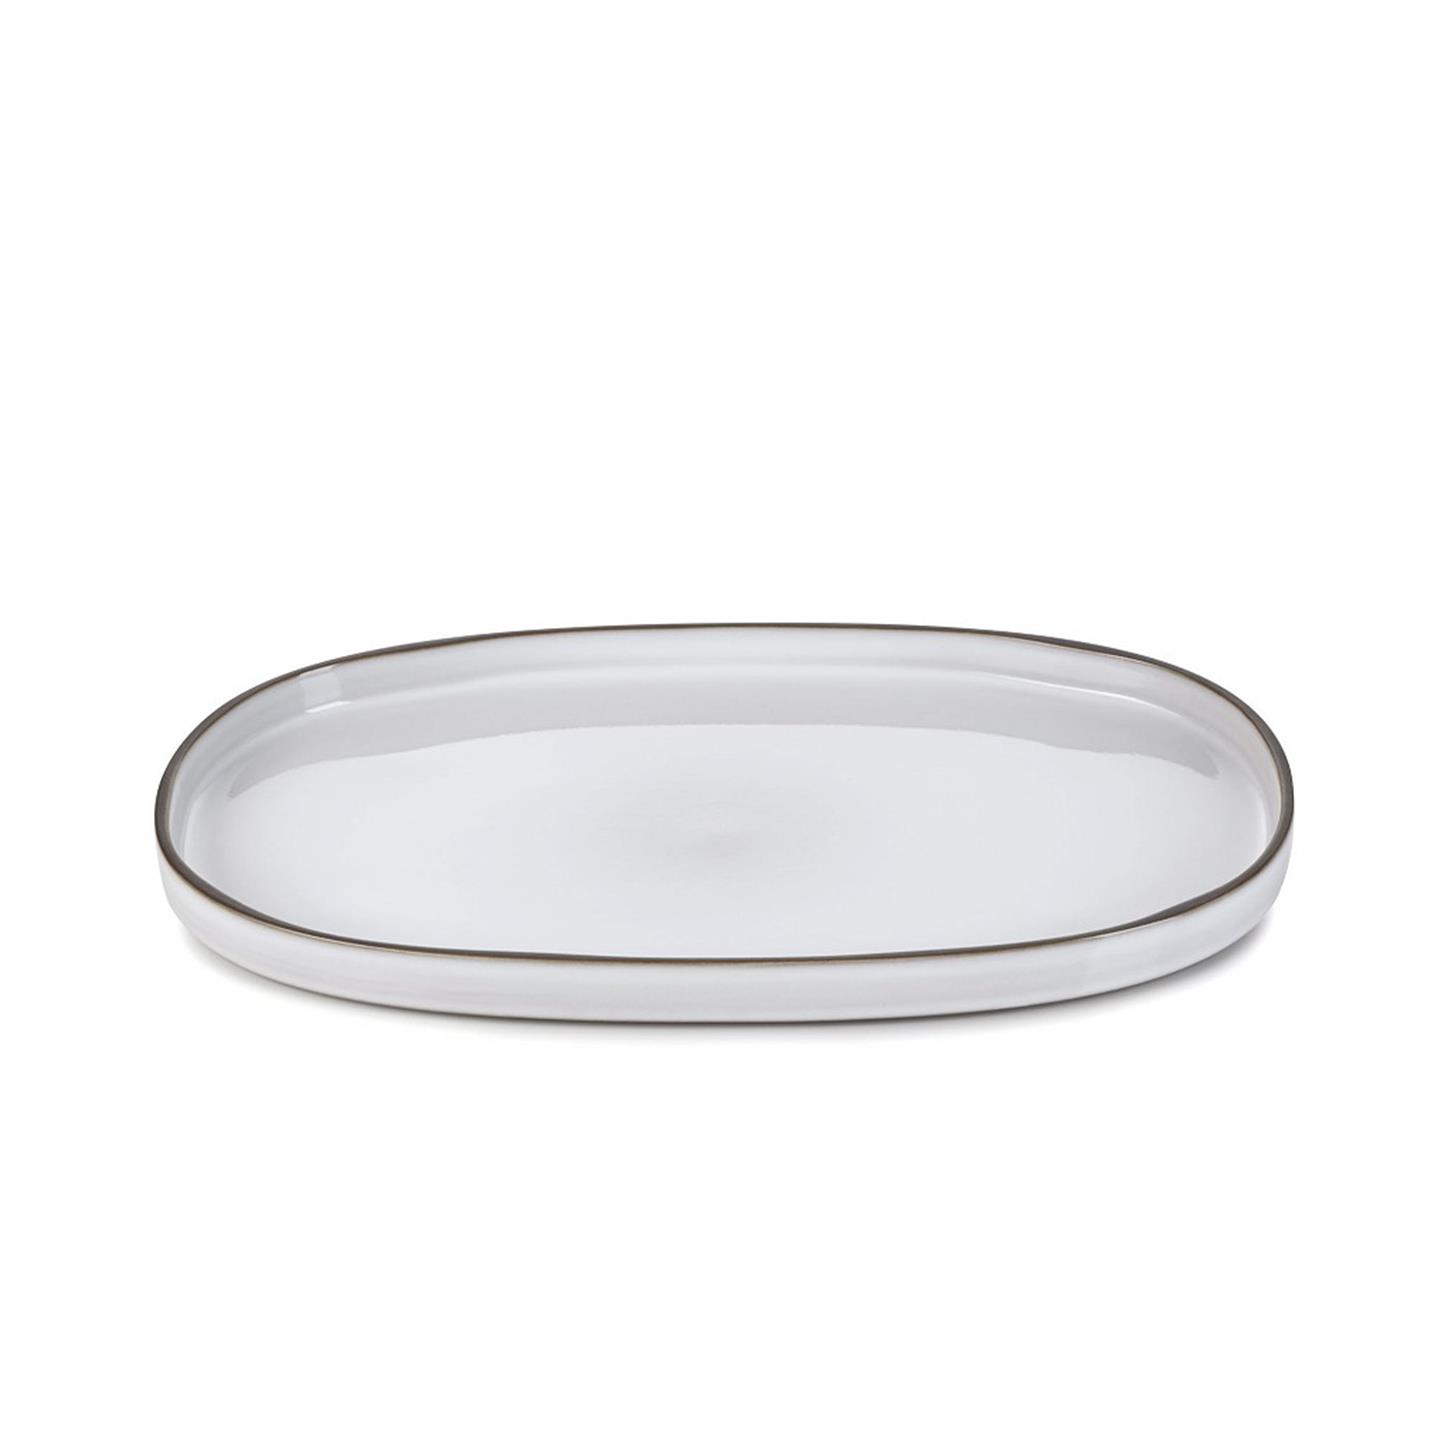 CARACTERE WHITE CUMULUS OVAL PLATE 35,5X21,8X2,5CM